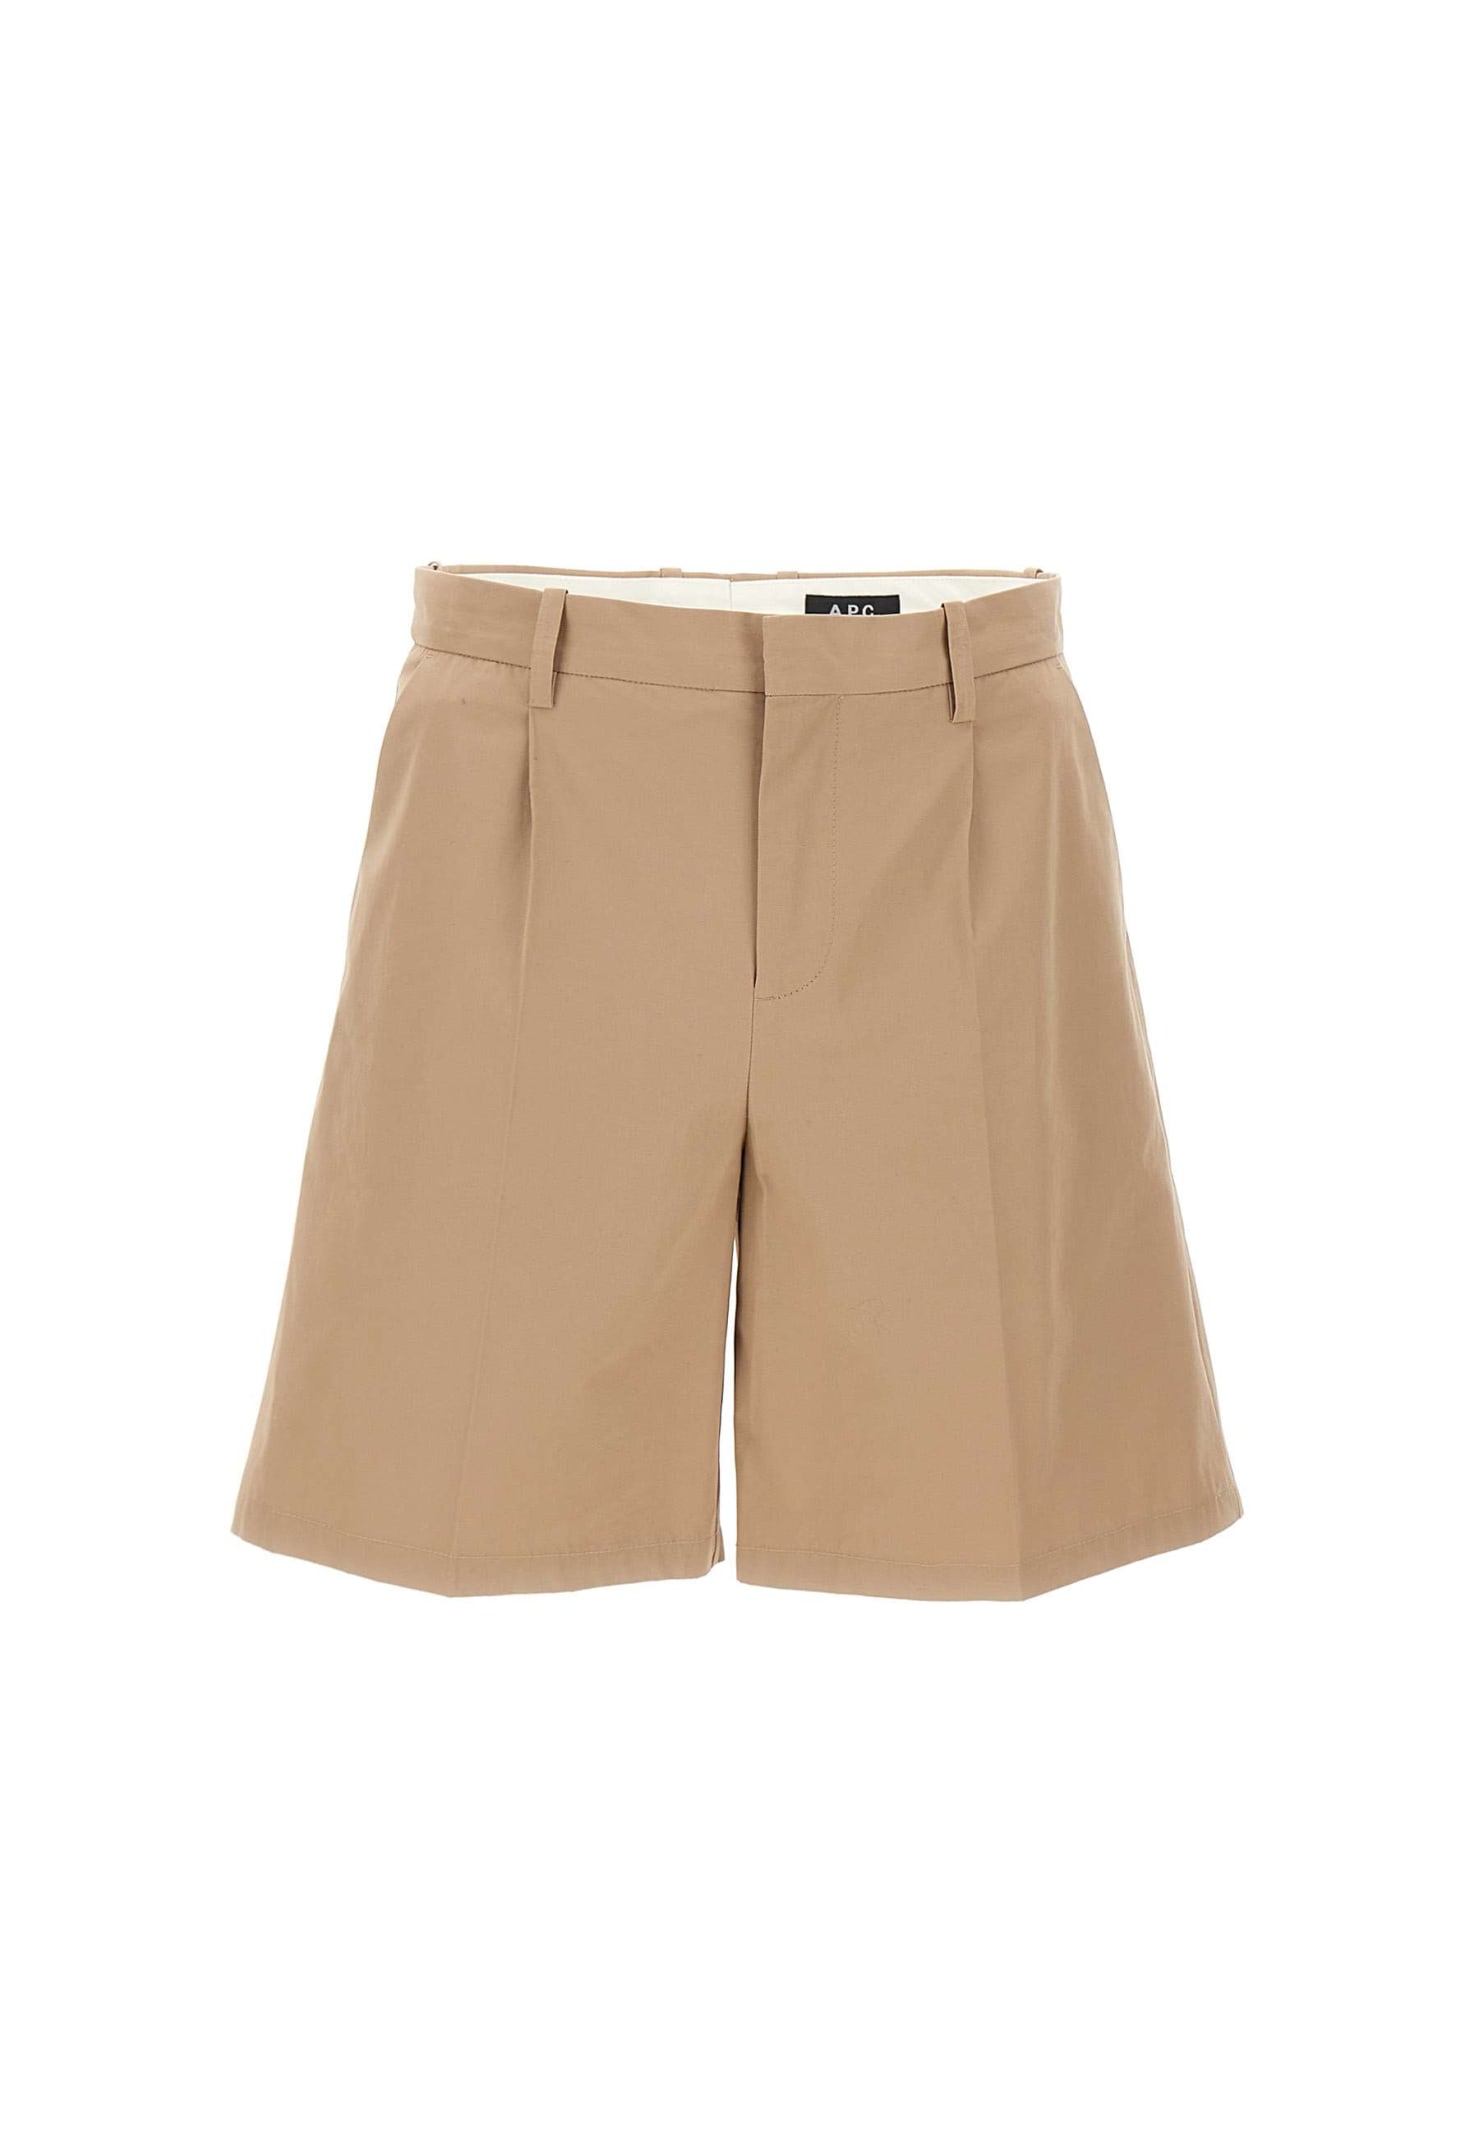 Apc Cotton Shorts Terry In Neutral